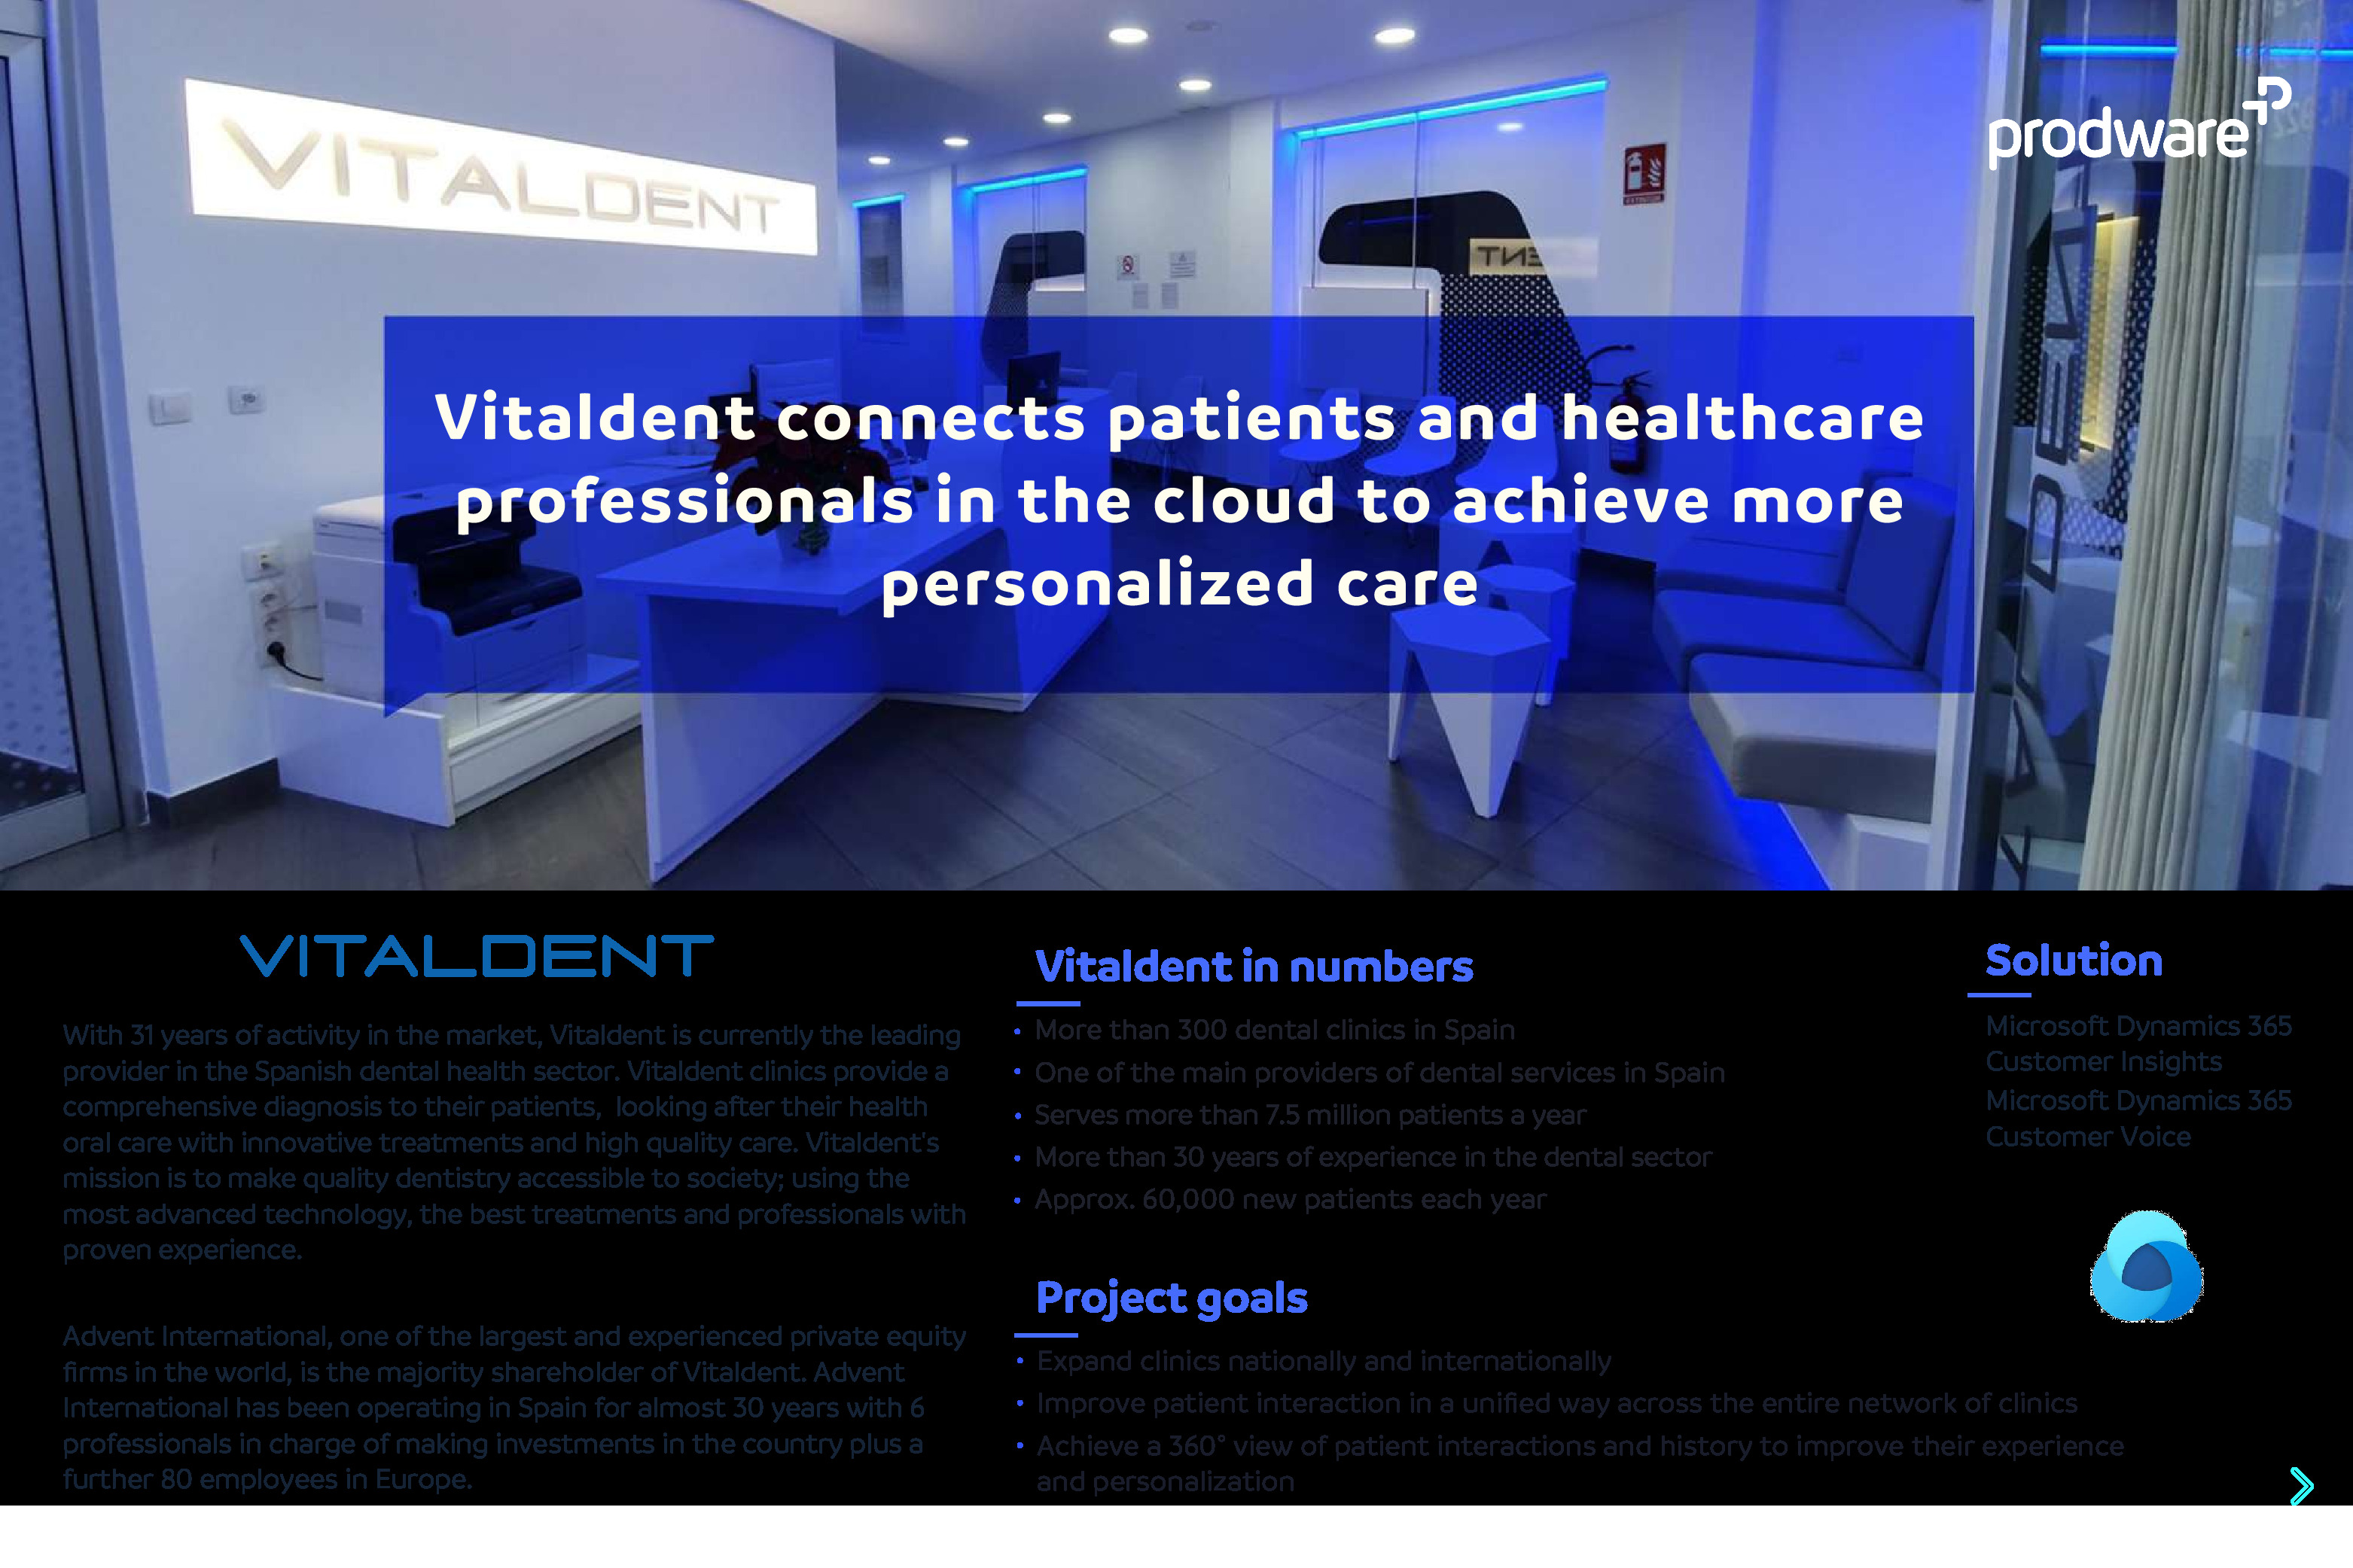 Vitaldent Connects Patients and Healthcare Providers in the Cloud to Achieve More Personalized Care